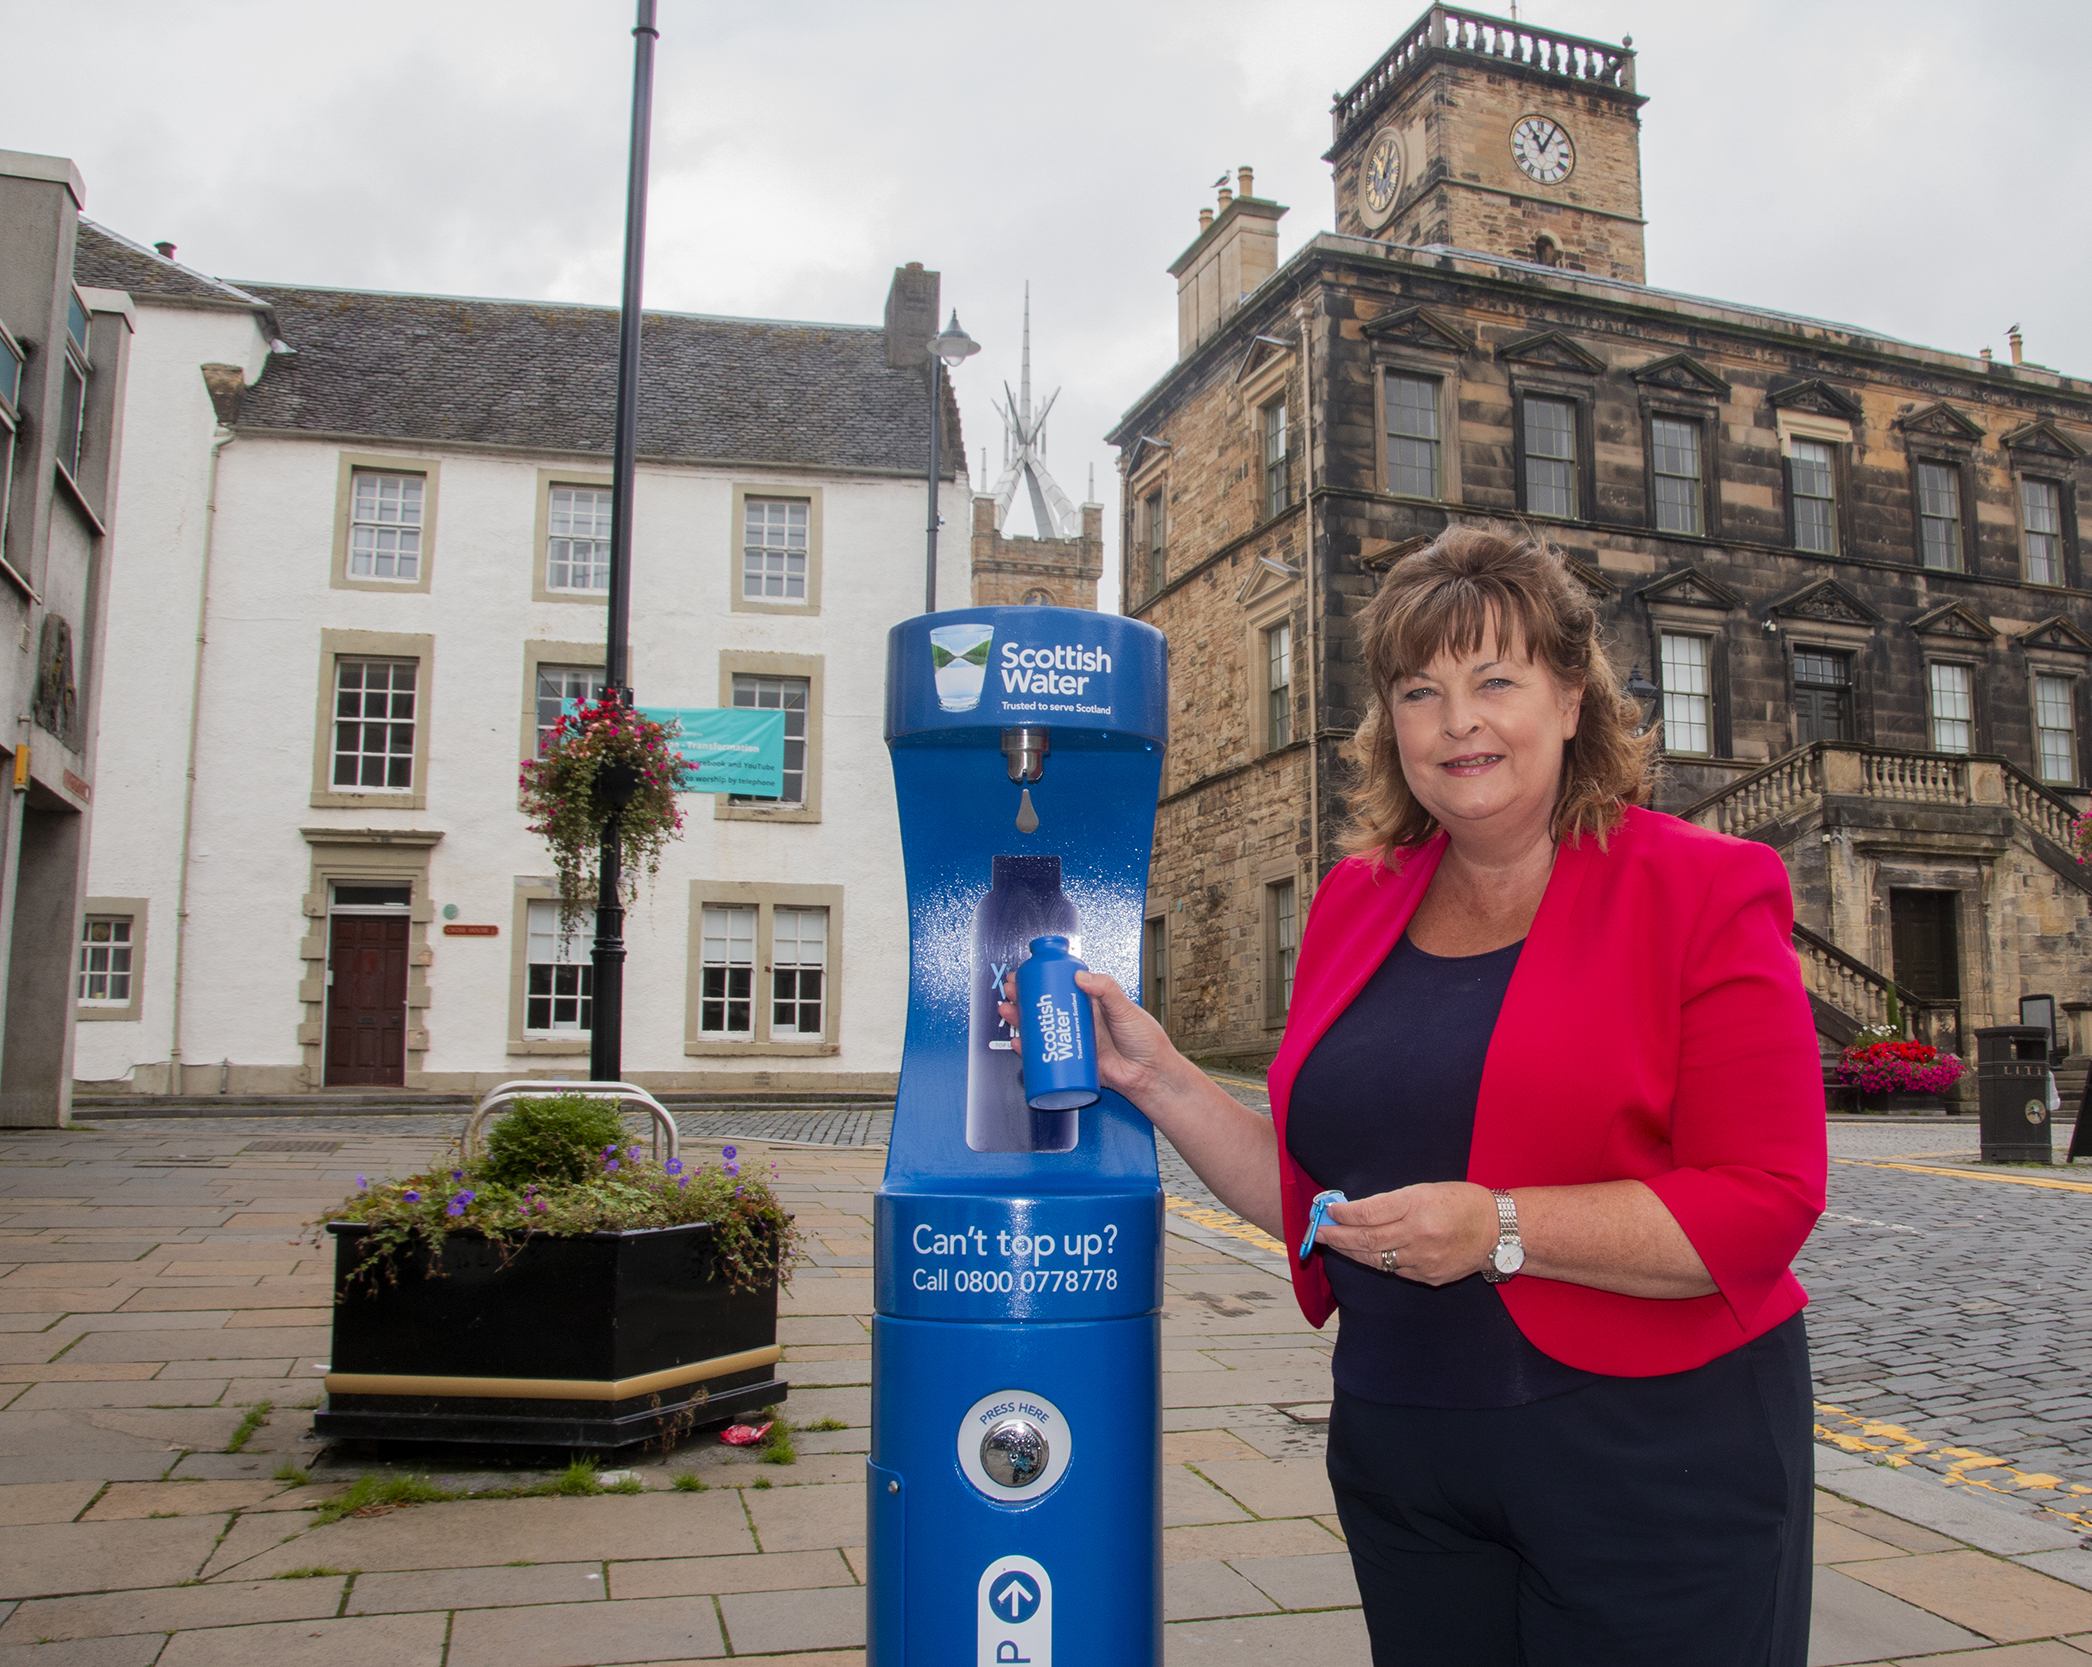 West Lothian’s first top up tap launches in Linlithgow